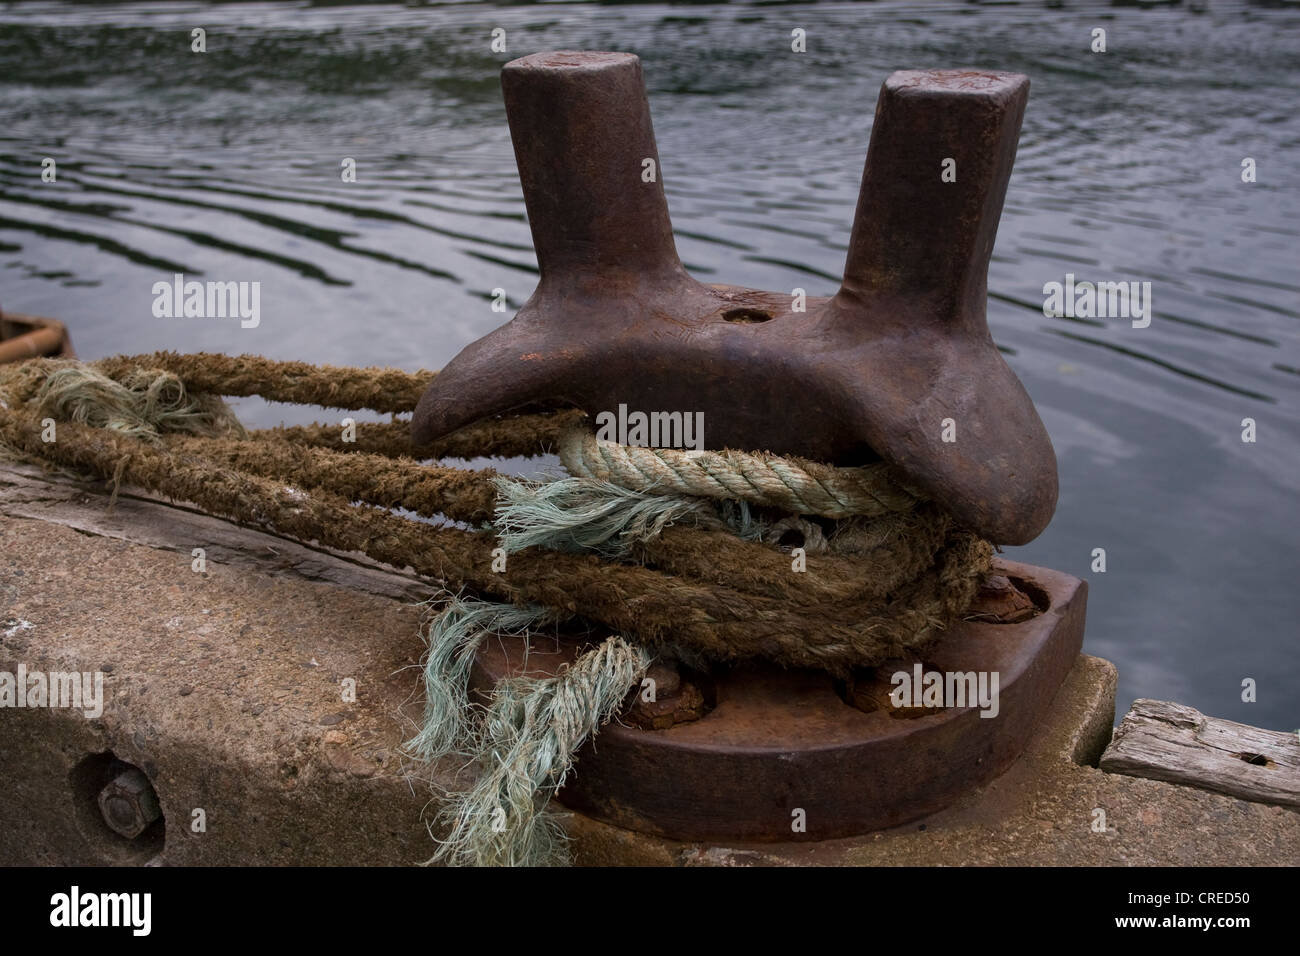 Thick ropes tied around a mooring at Mallaig Harbour, Scotland. Stock Photo